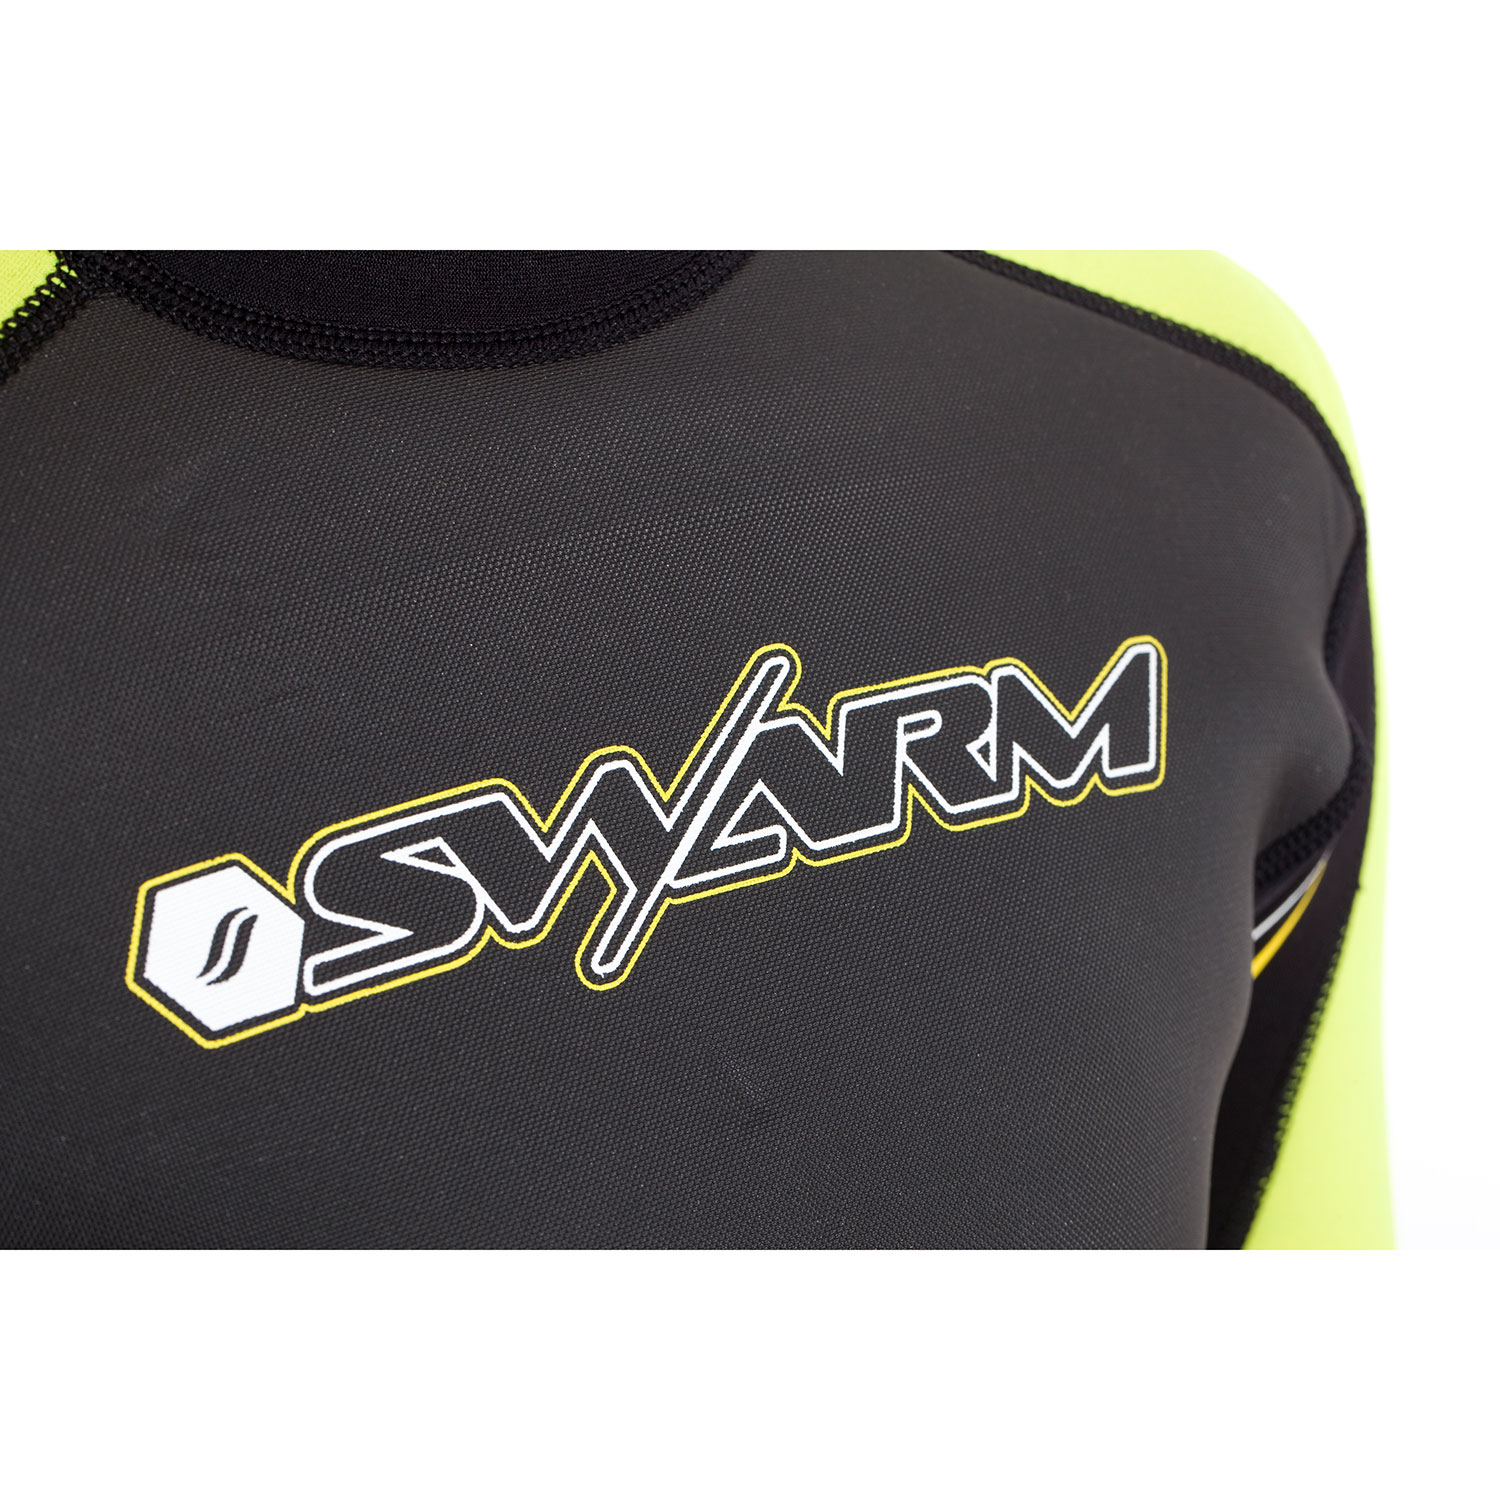 Details about   Typhoon Swarm Infants 3mm Shorty Wetsuit 2021 471351 Flame Yellow 